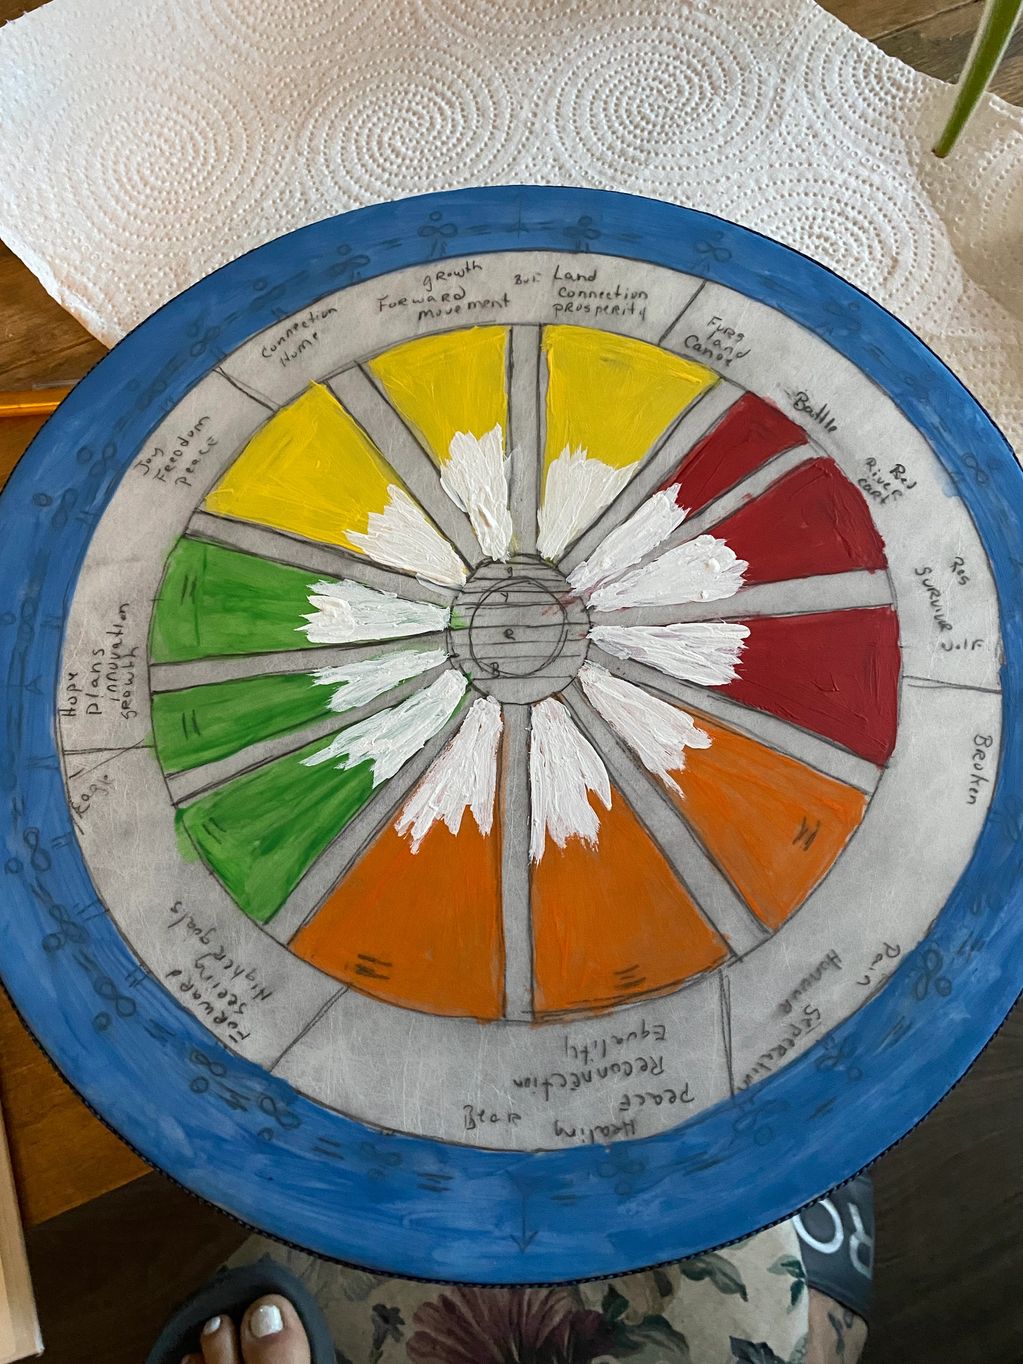 Creating the OUR TIME ON THE WHEEL drum